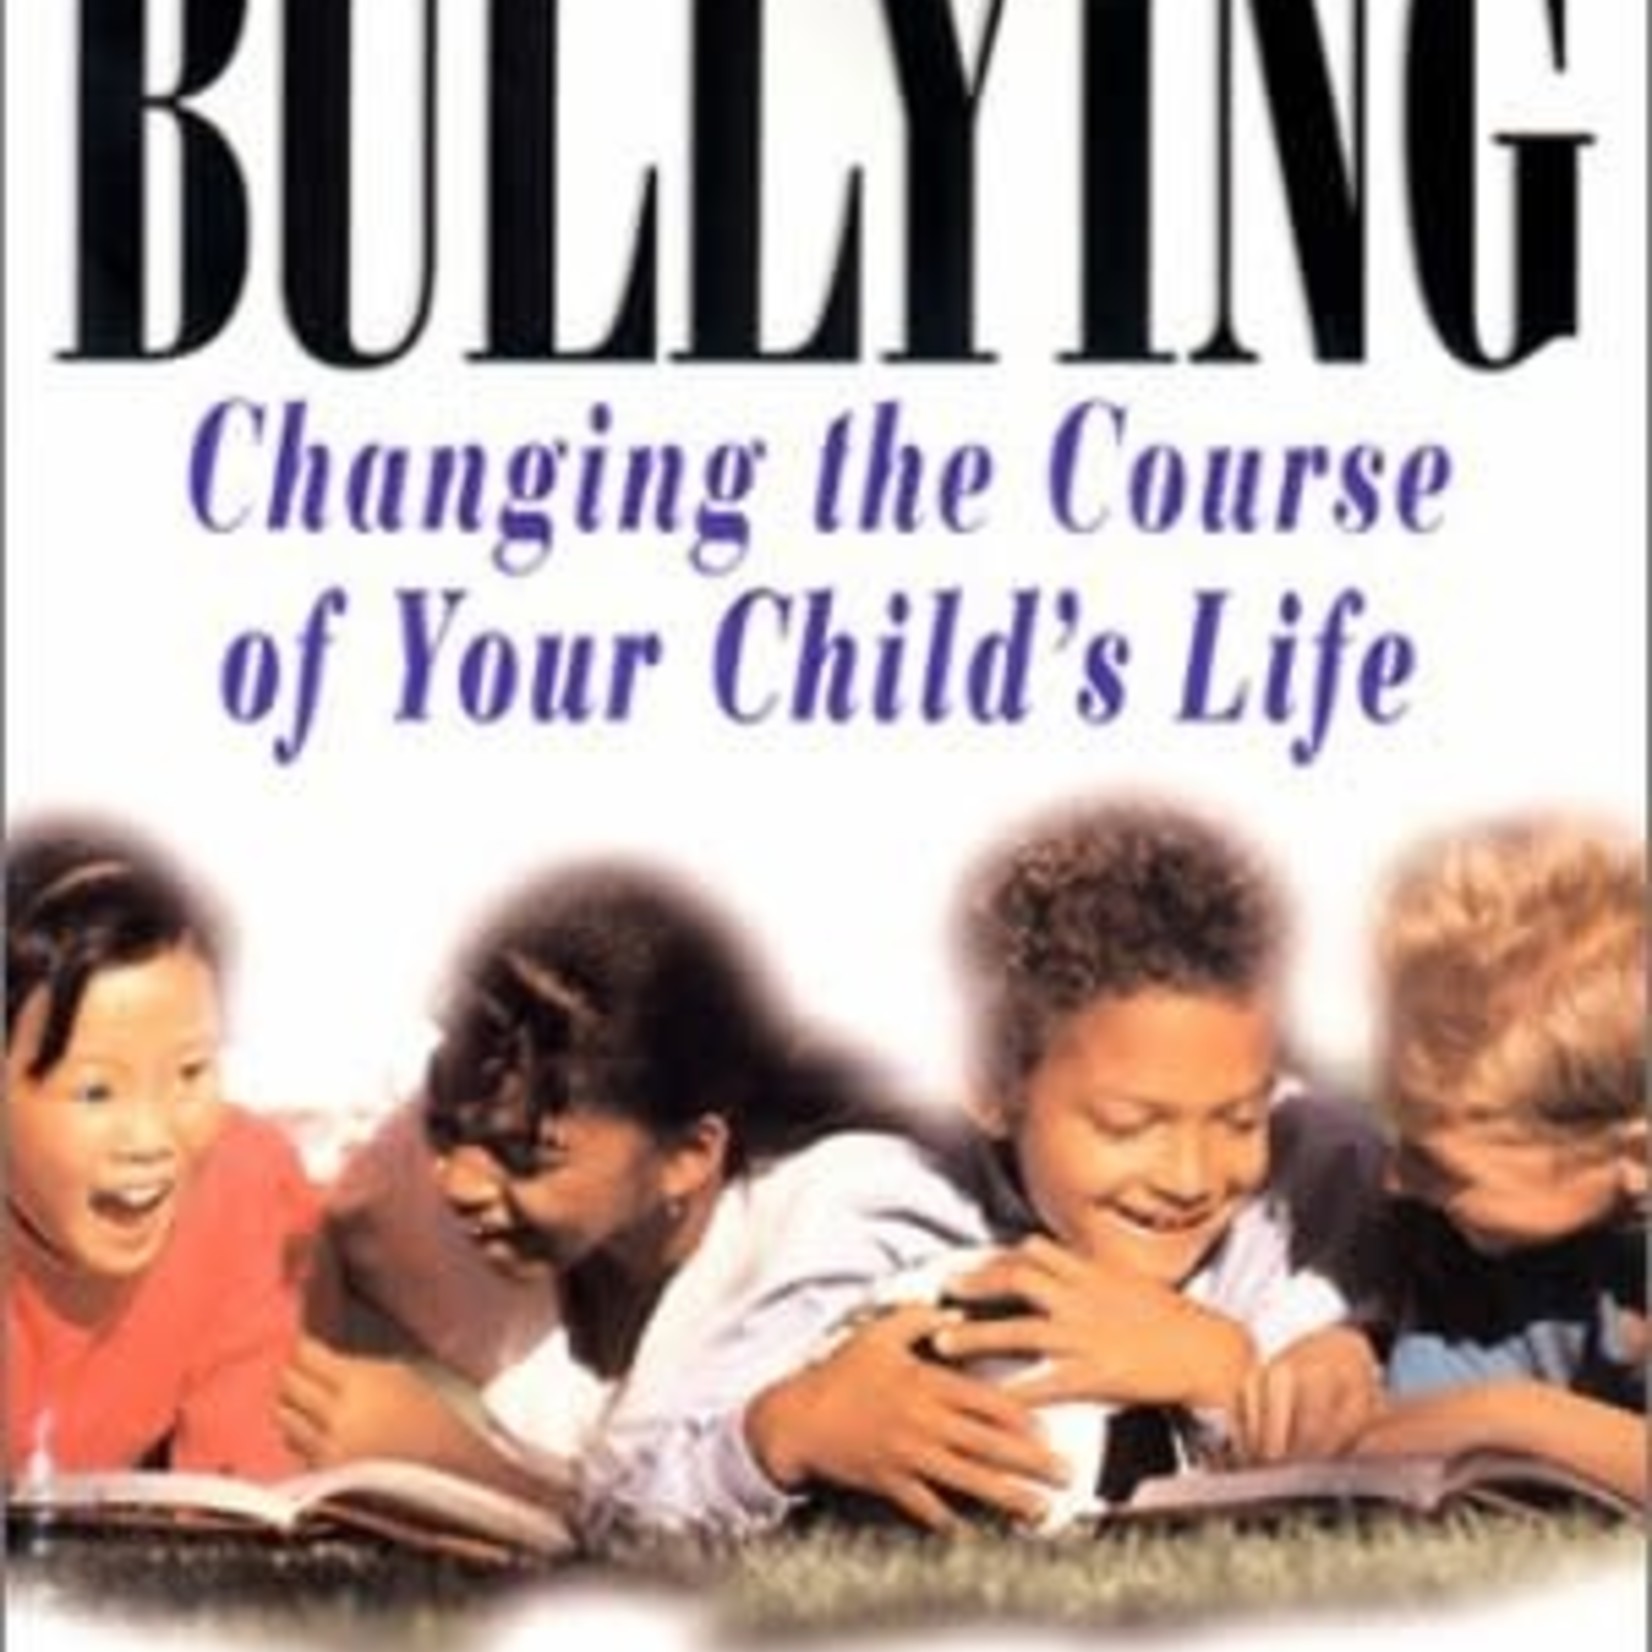 The Parent's Guide About Bullying